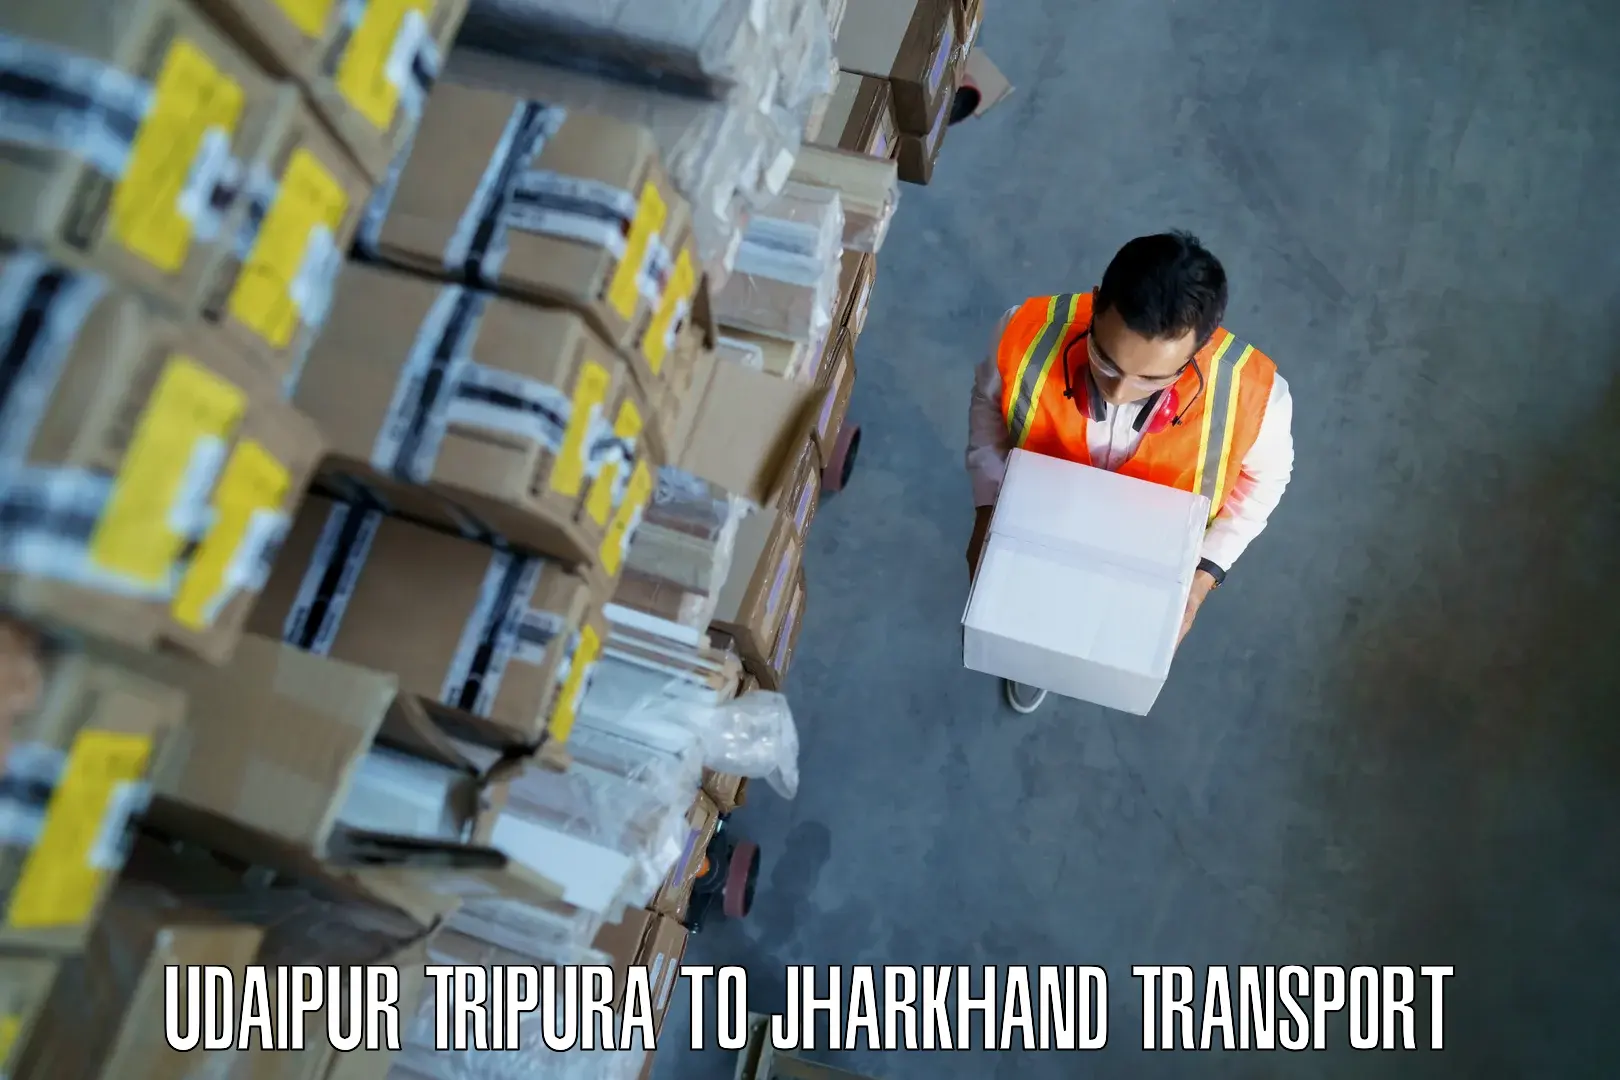 Express transport services Udaipur Tripura to Jharkhand